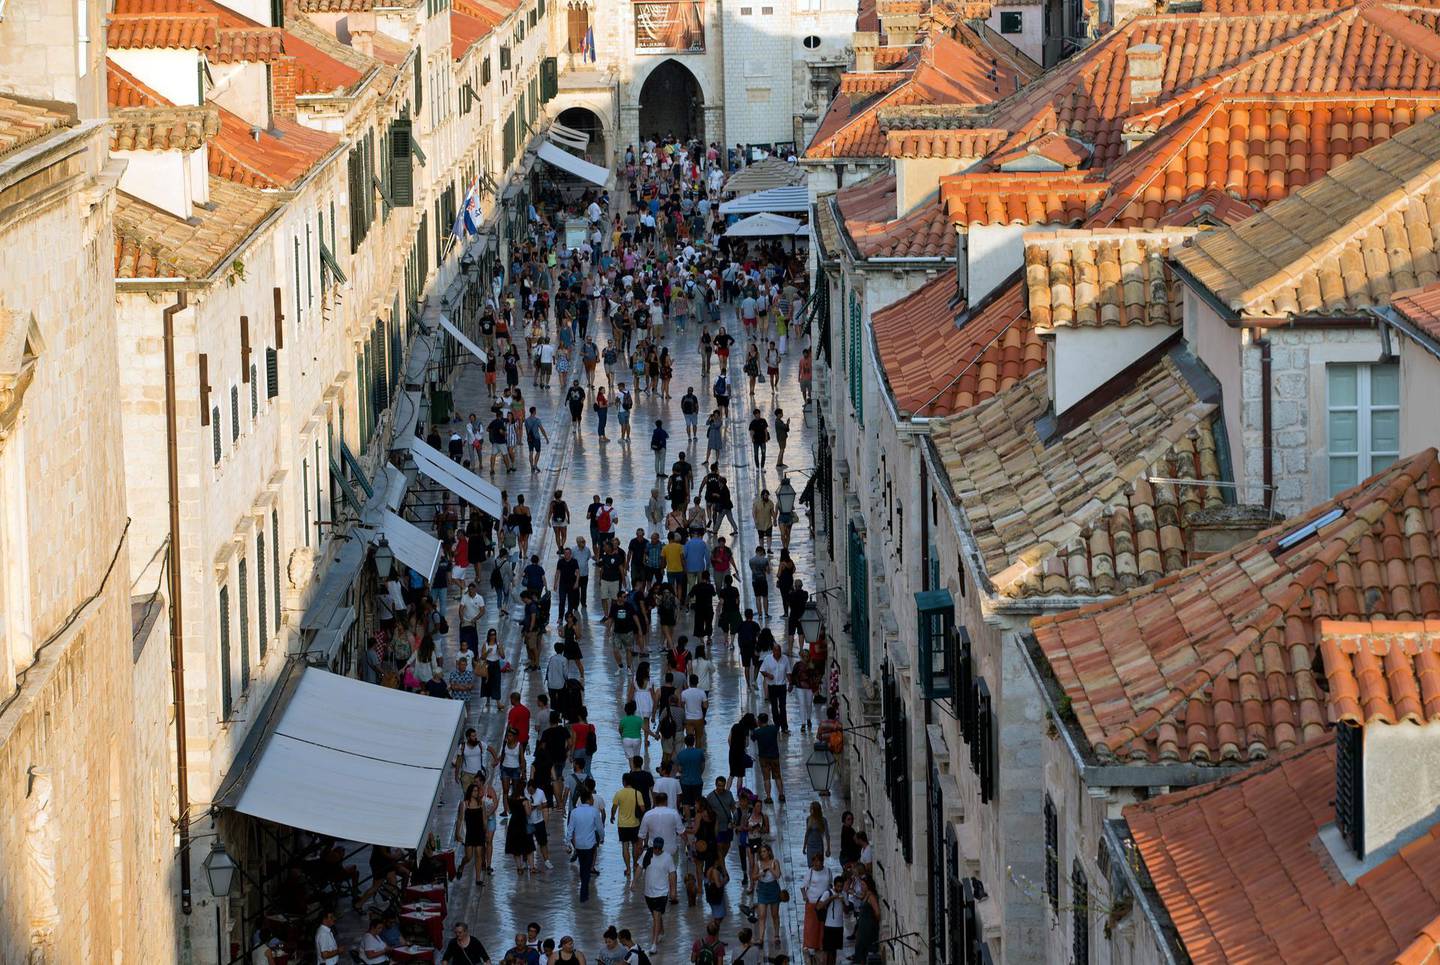 In this Sept. 7, 2018 photo, tourists walk through Dubrovnik old town. Crowds of tourist are clogging the entrances into the ancient walled city, a UNESCO World Heritage Site, as huge cruise ships unload thousands more daily. (AP Photo/Darko Bandic)